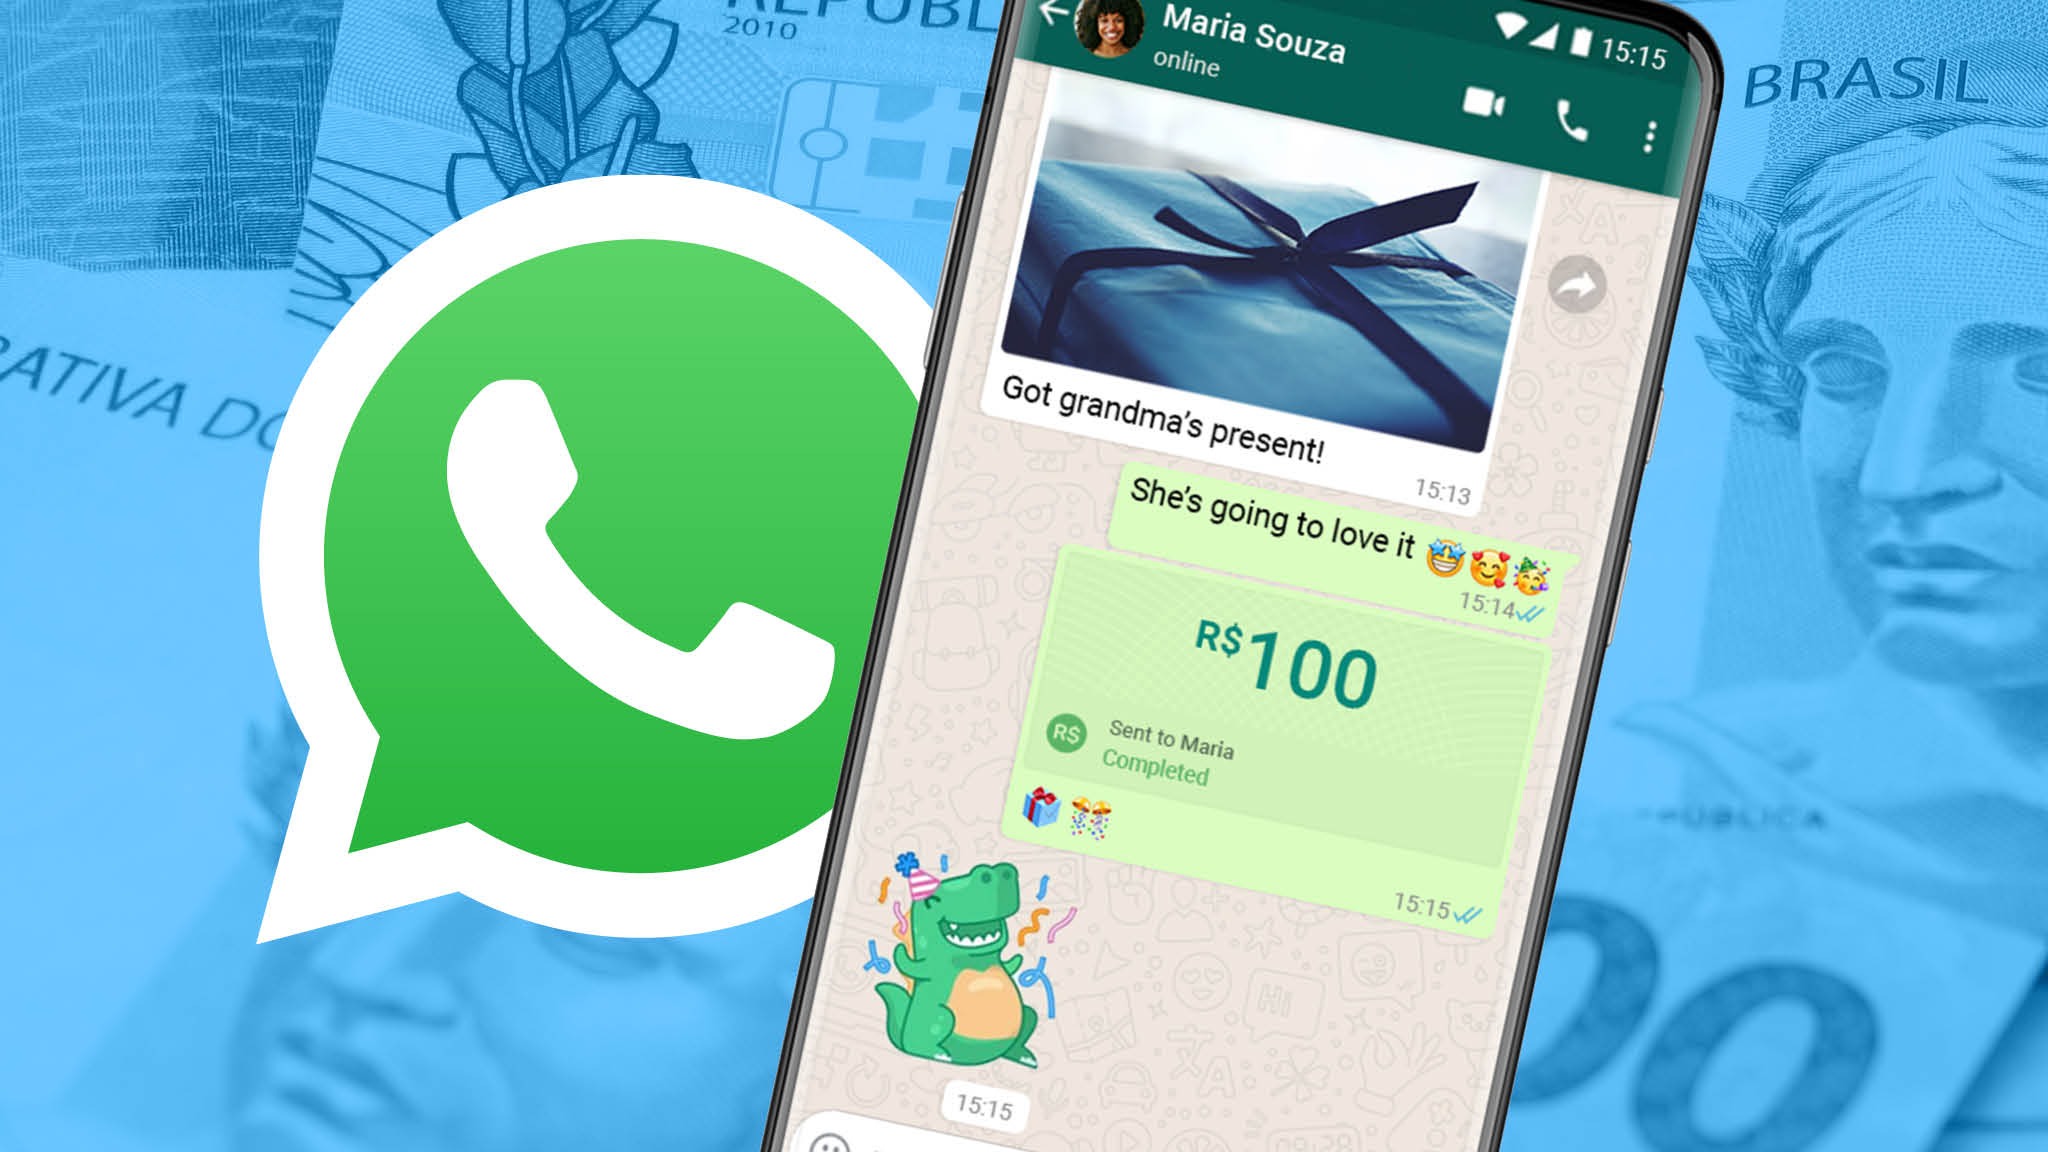 WhatsApp working on updating UPI payments feature